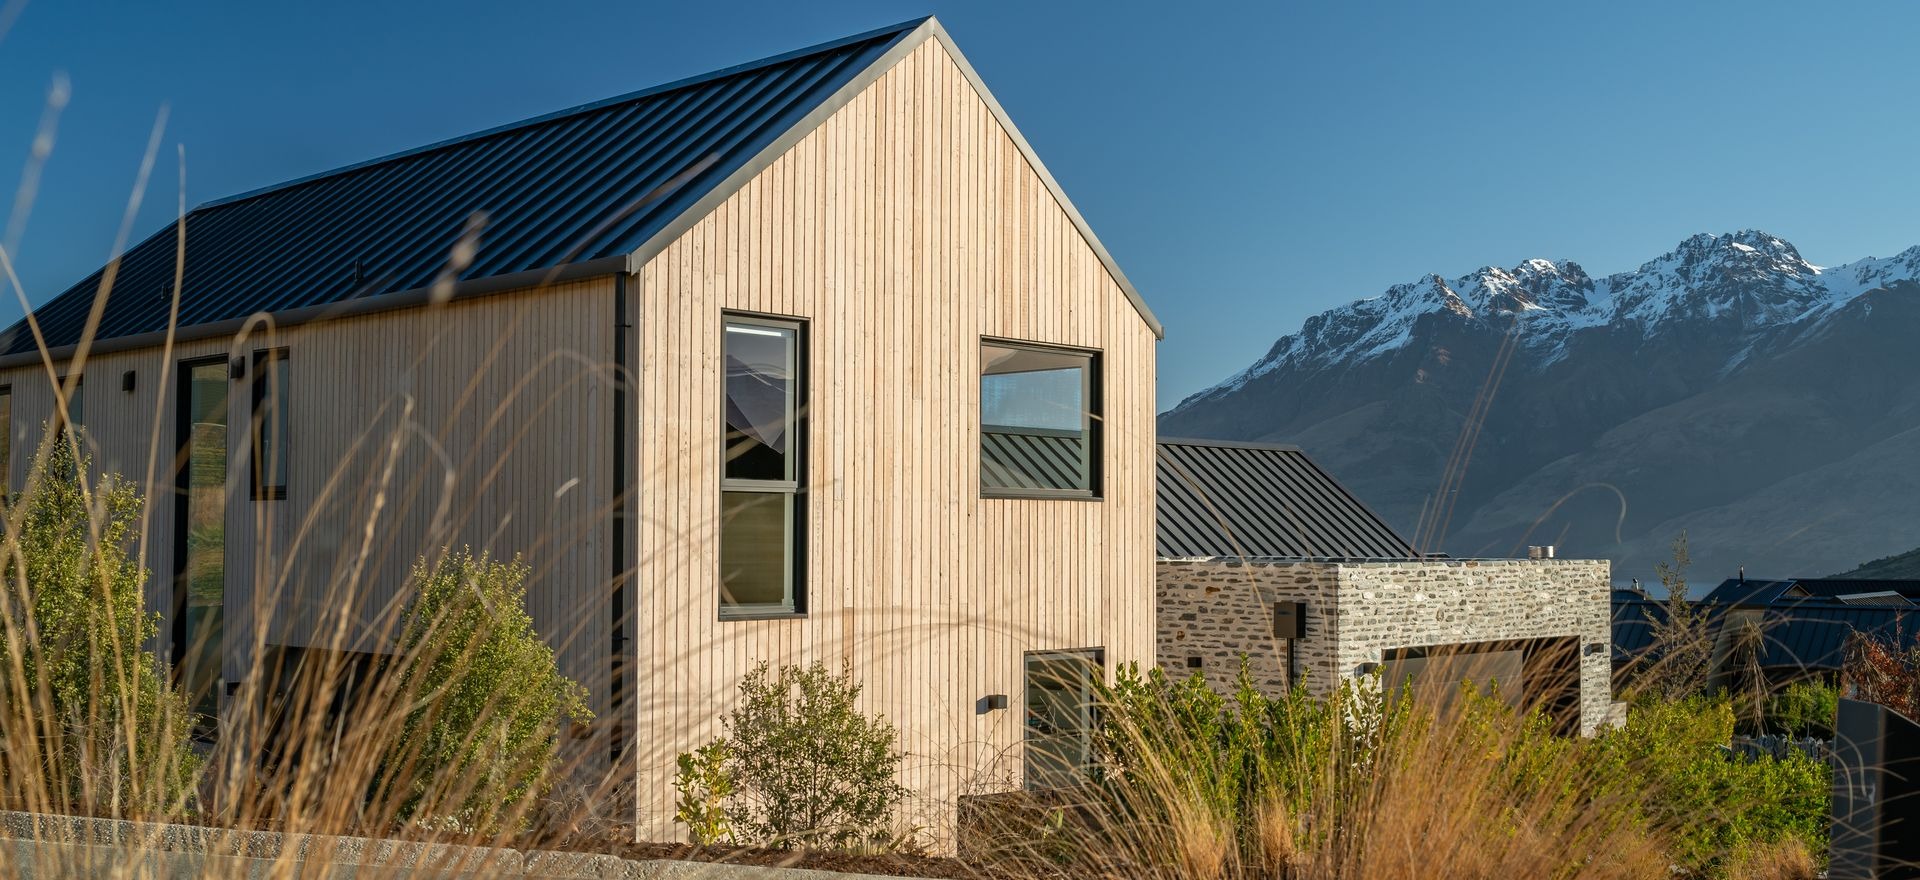 A gabled home framing mountain views in Queenstown